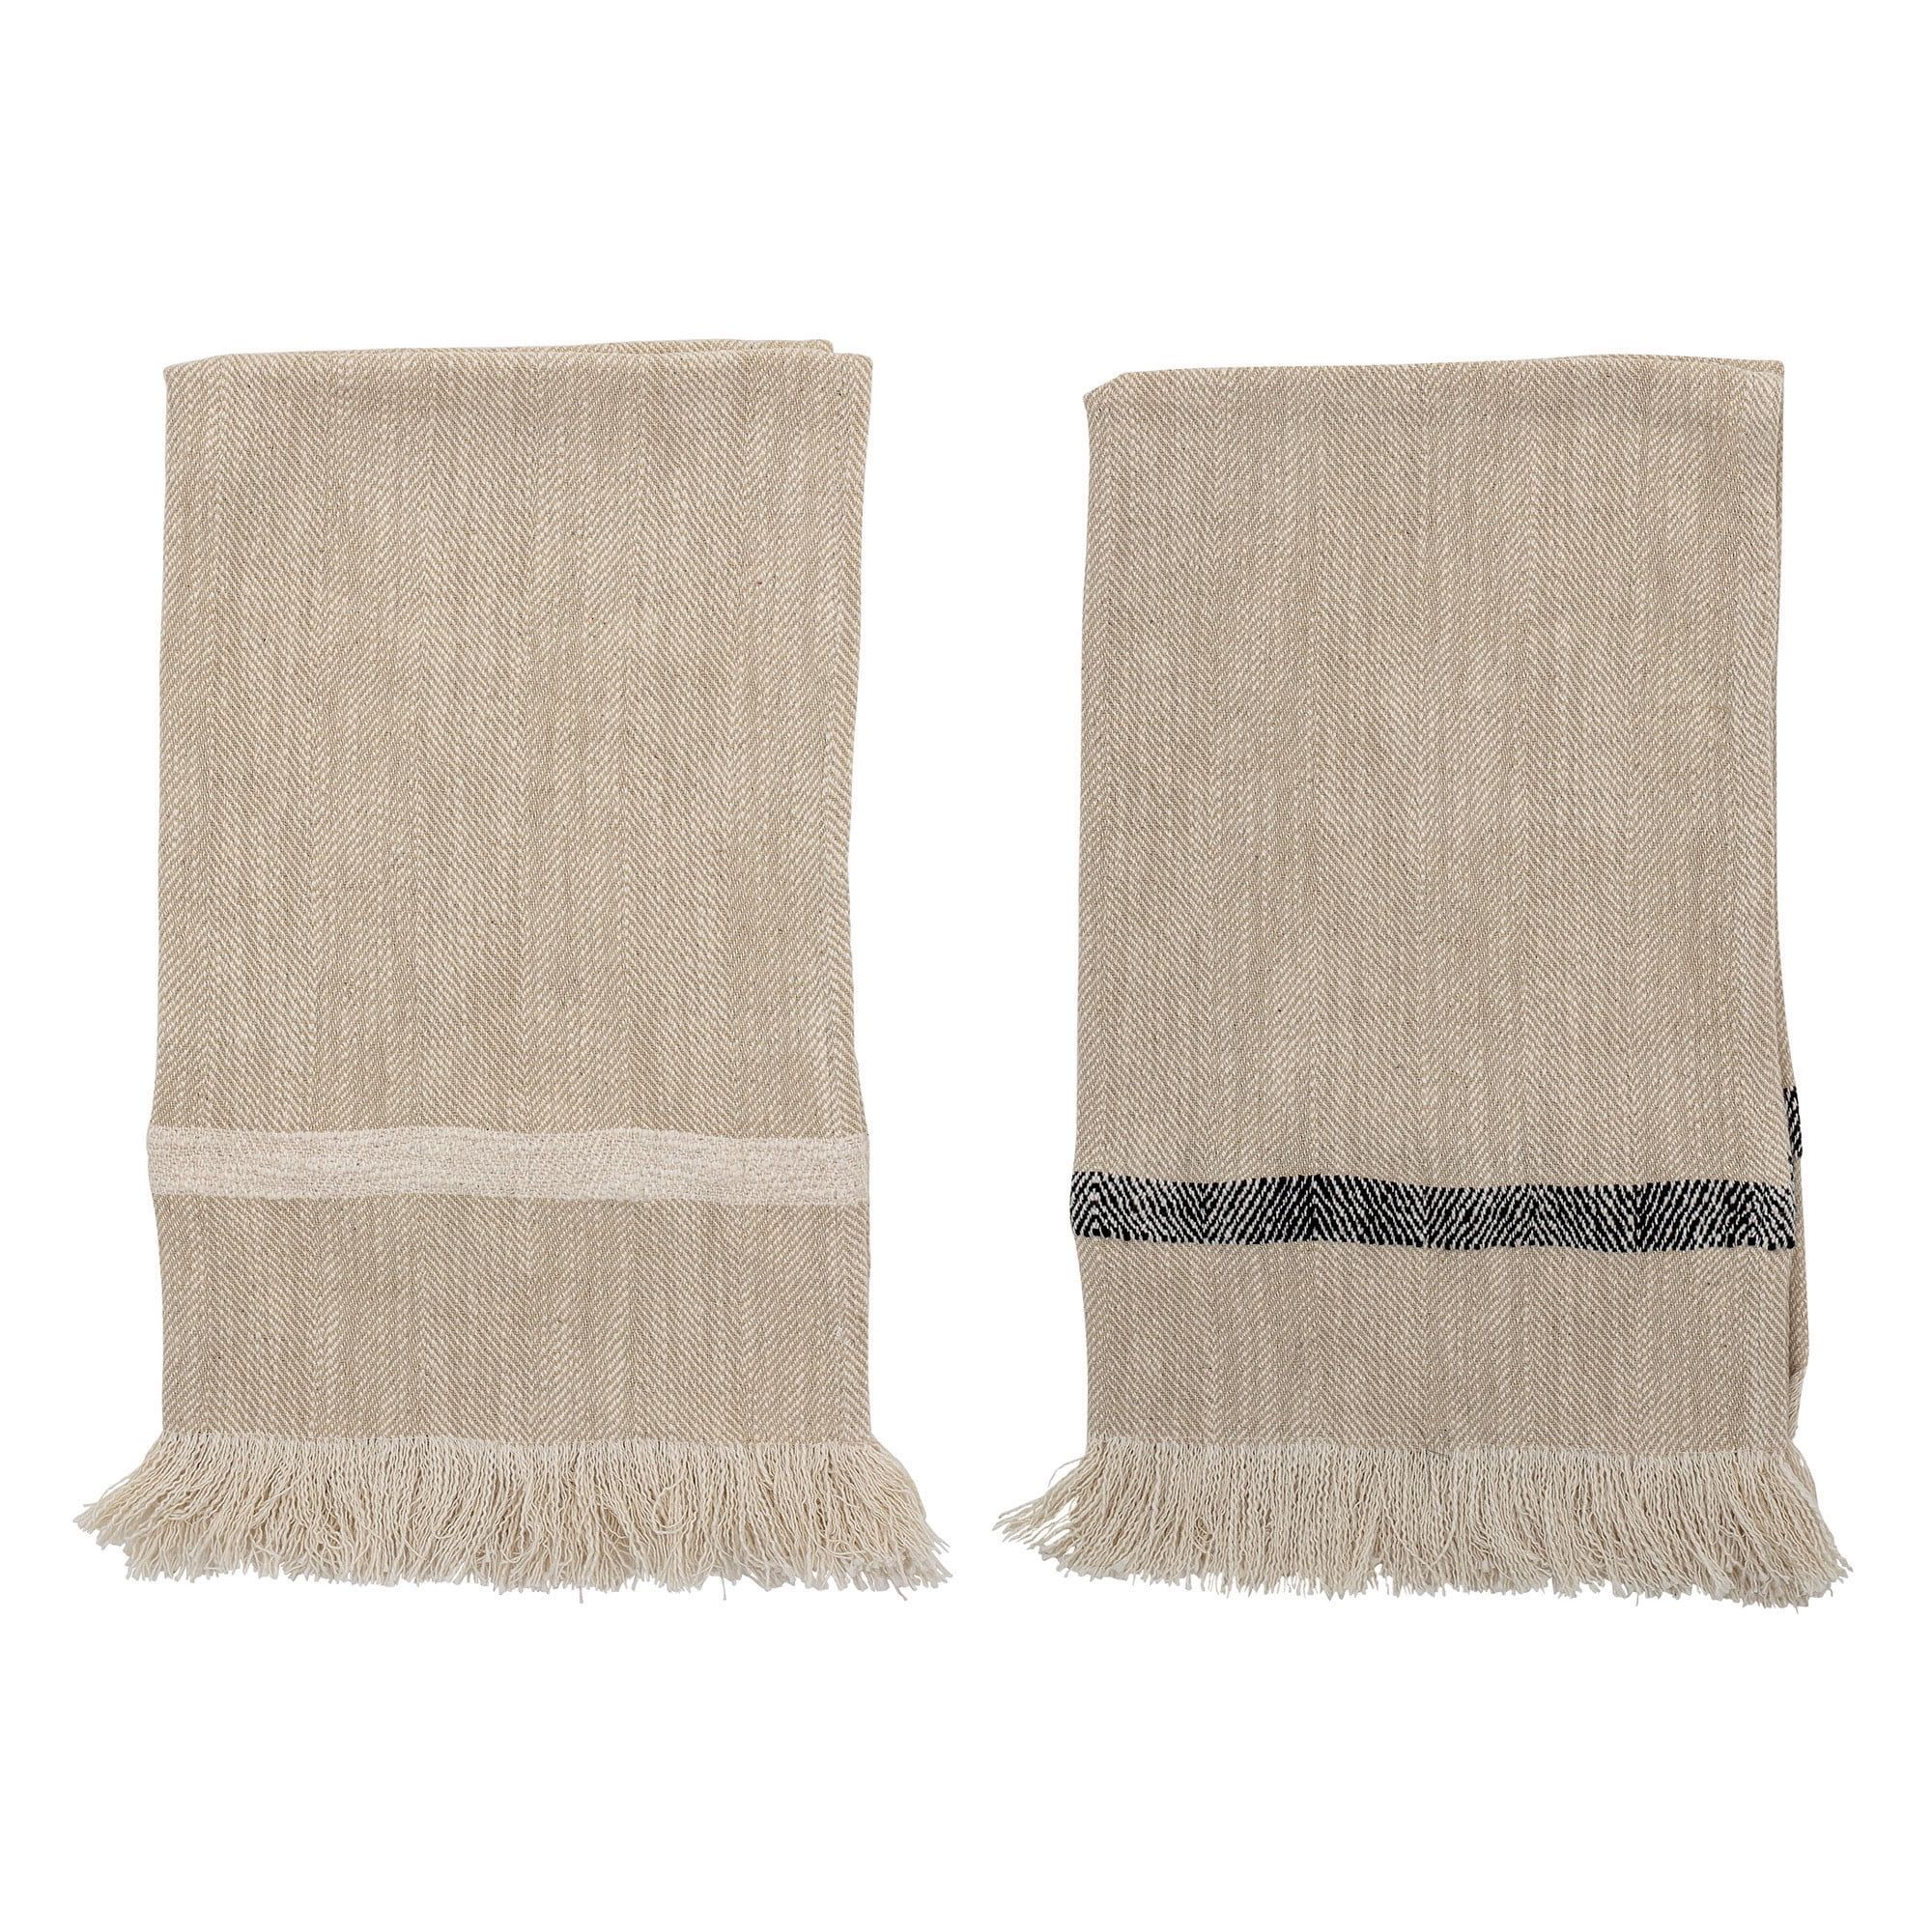 Bloomingville Woven Cotton Striped Tea Towels with Tassels (Set of 2) | Walmart (US)